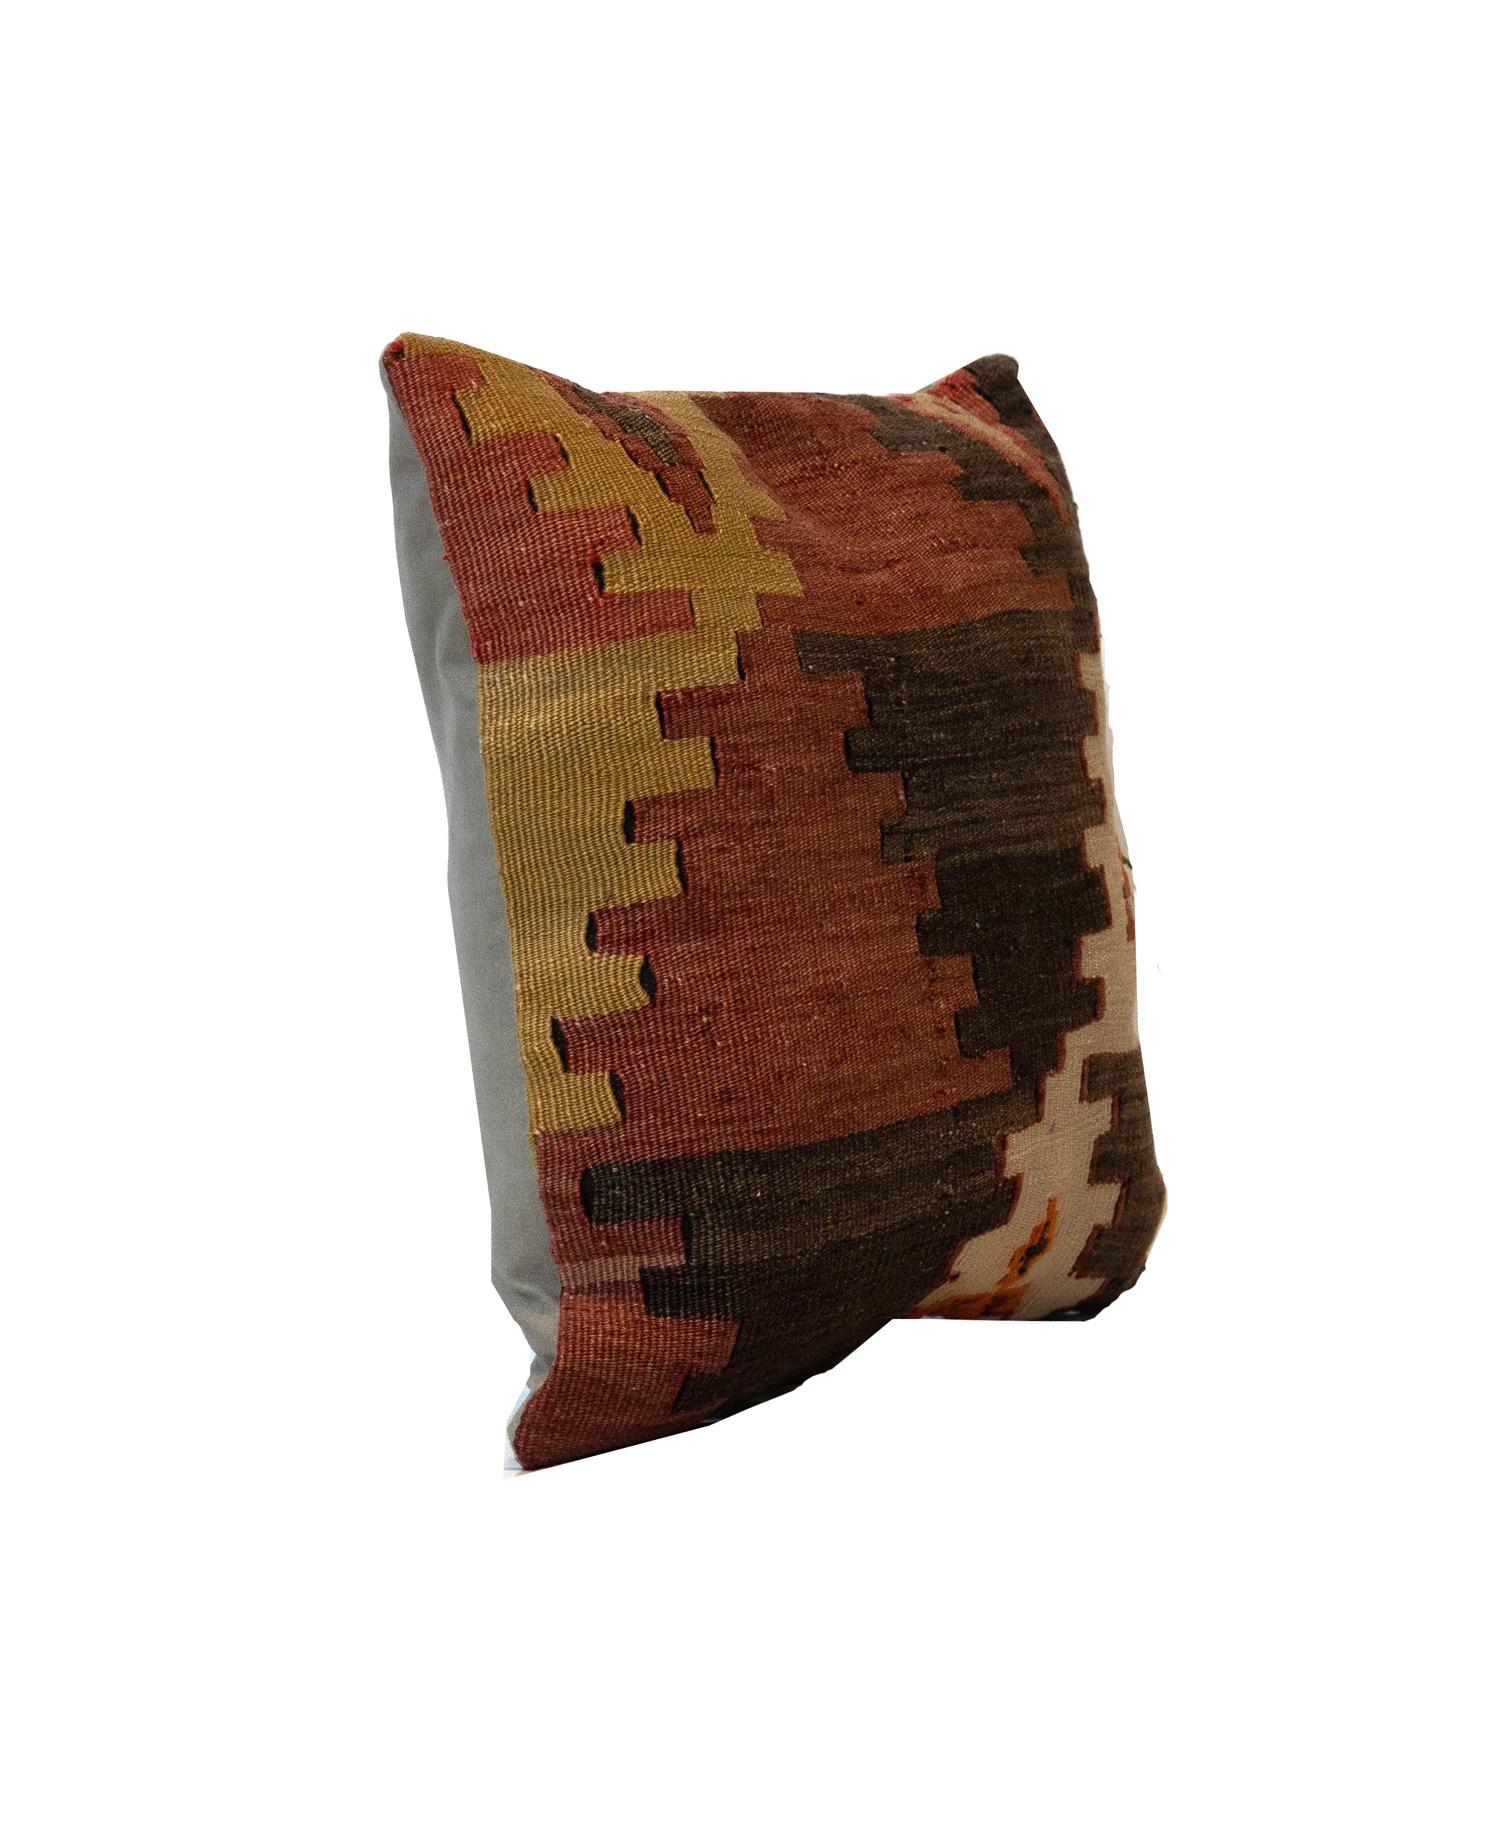 Turkish Small Throw Pillow Cover, Kilim Decorative Pillow, Bench Cushion Cover Rose Cut